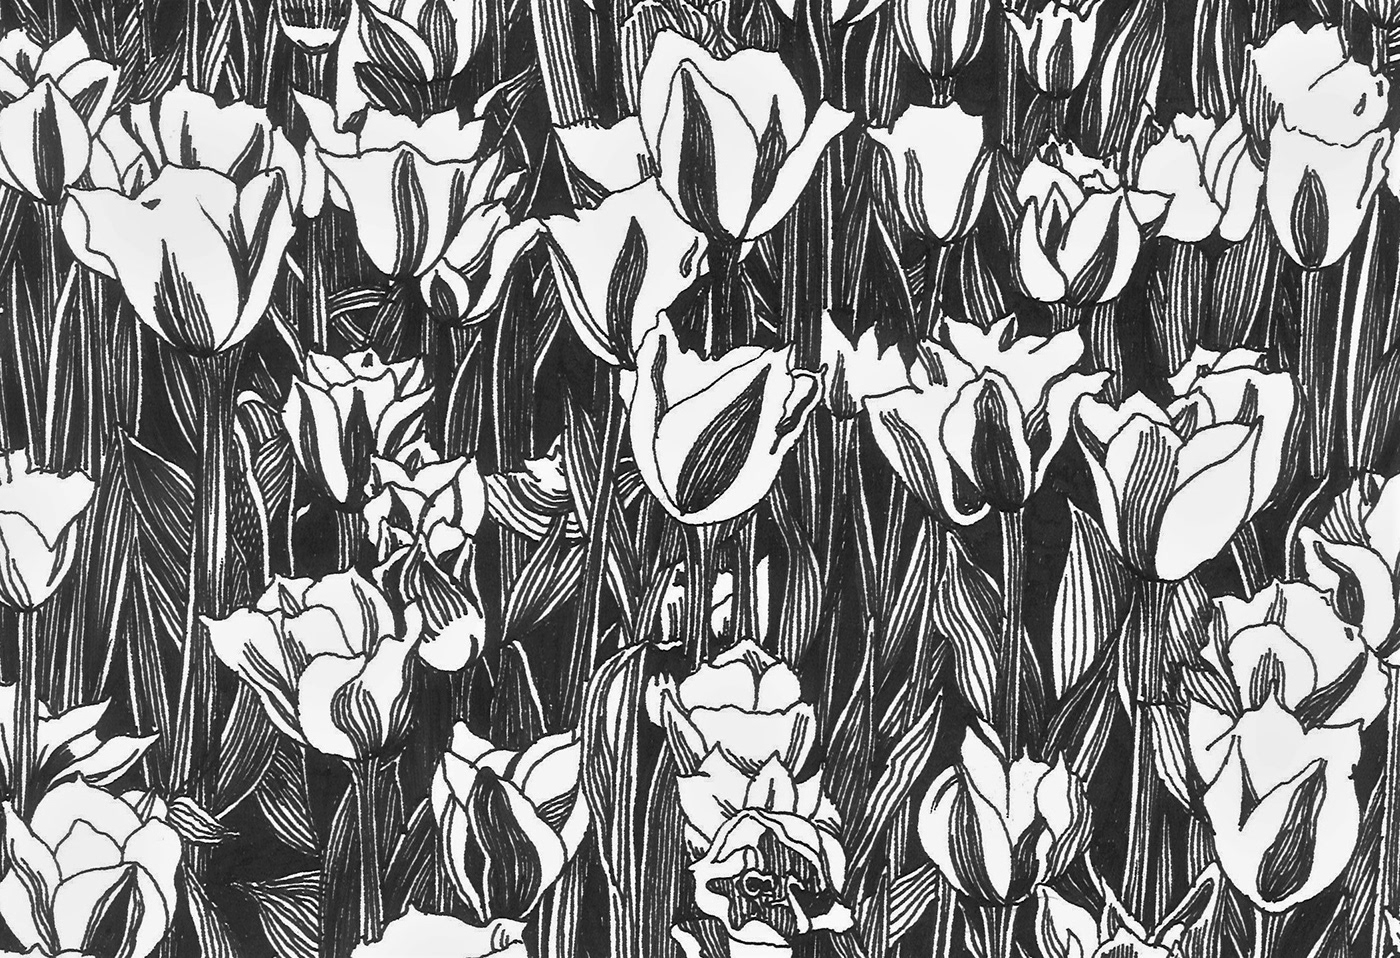 ink drawings floral art nature design Hand made drawings mastery drawing tulips nature patterns decorative art contemporary drawing artwork on paper